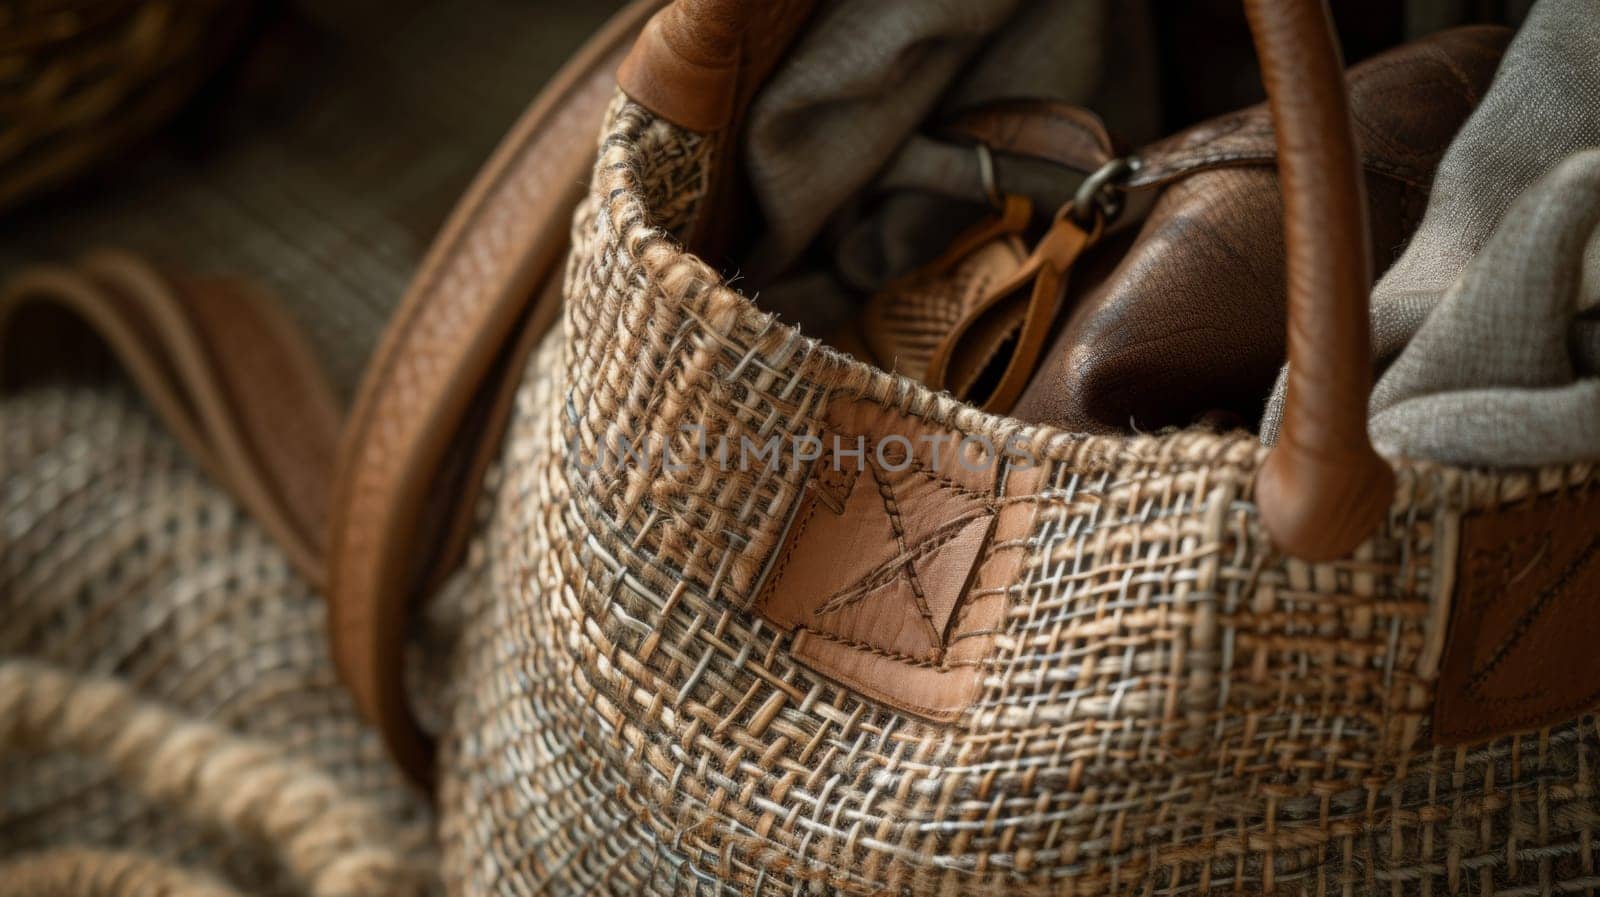 A close up of a woven bag with some items inside, AI by starush